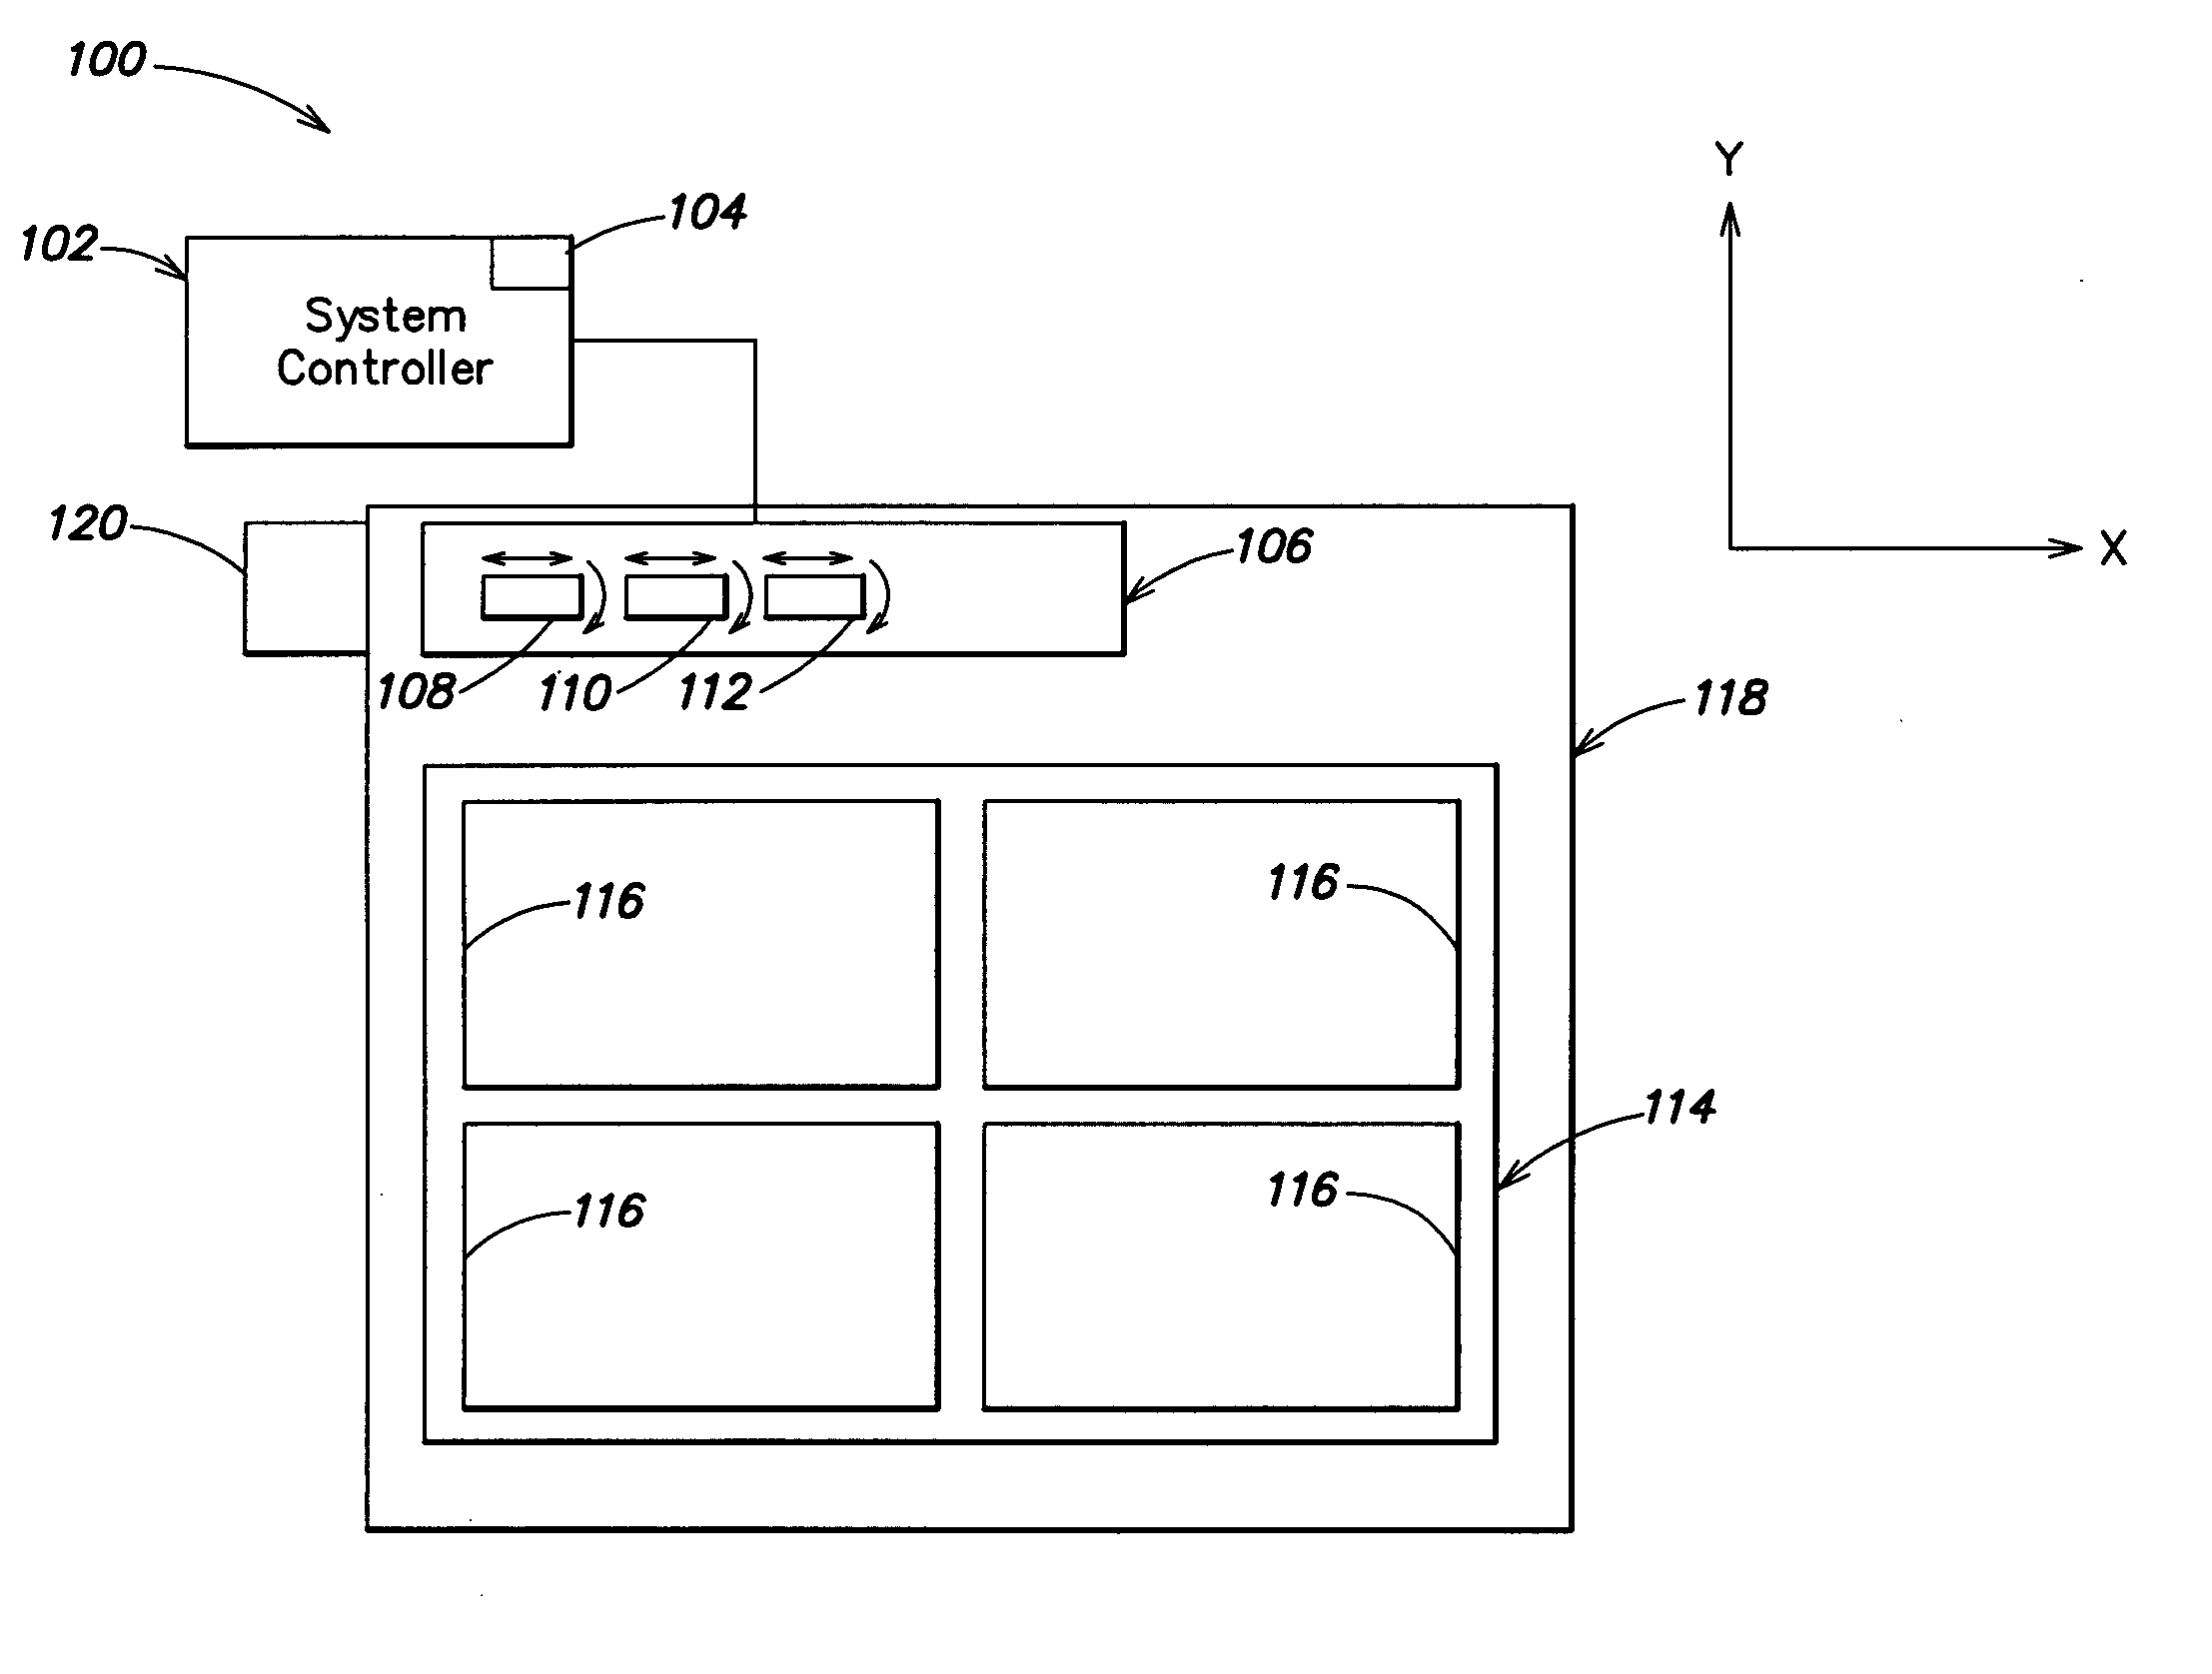 Apparatus and methods for an inkjet head support having an inkjet head capable of independent lateral movement